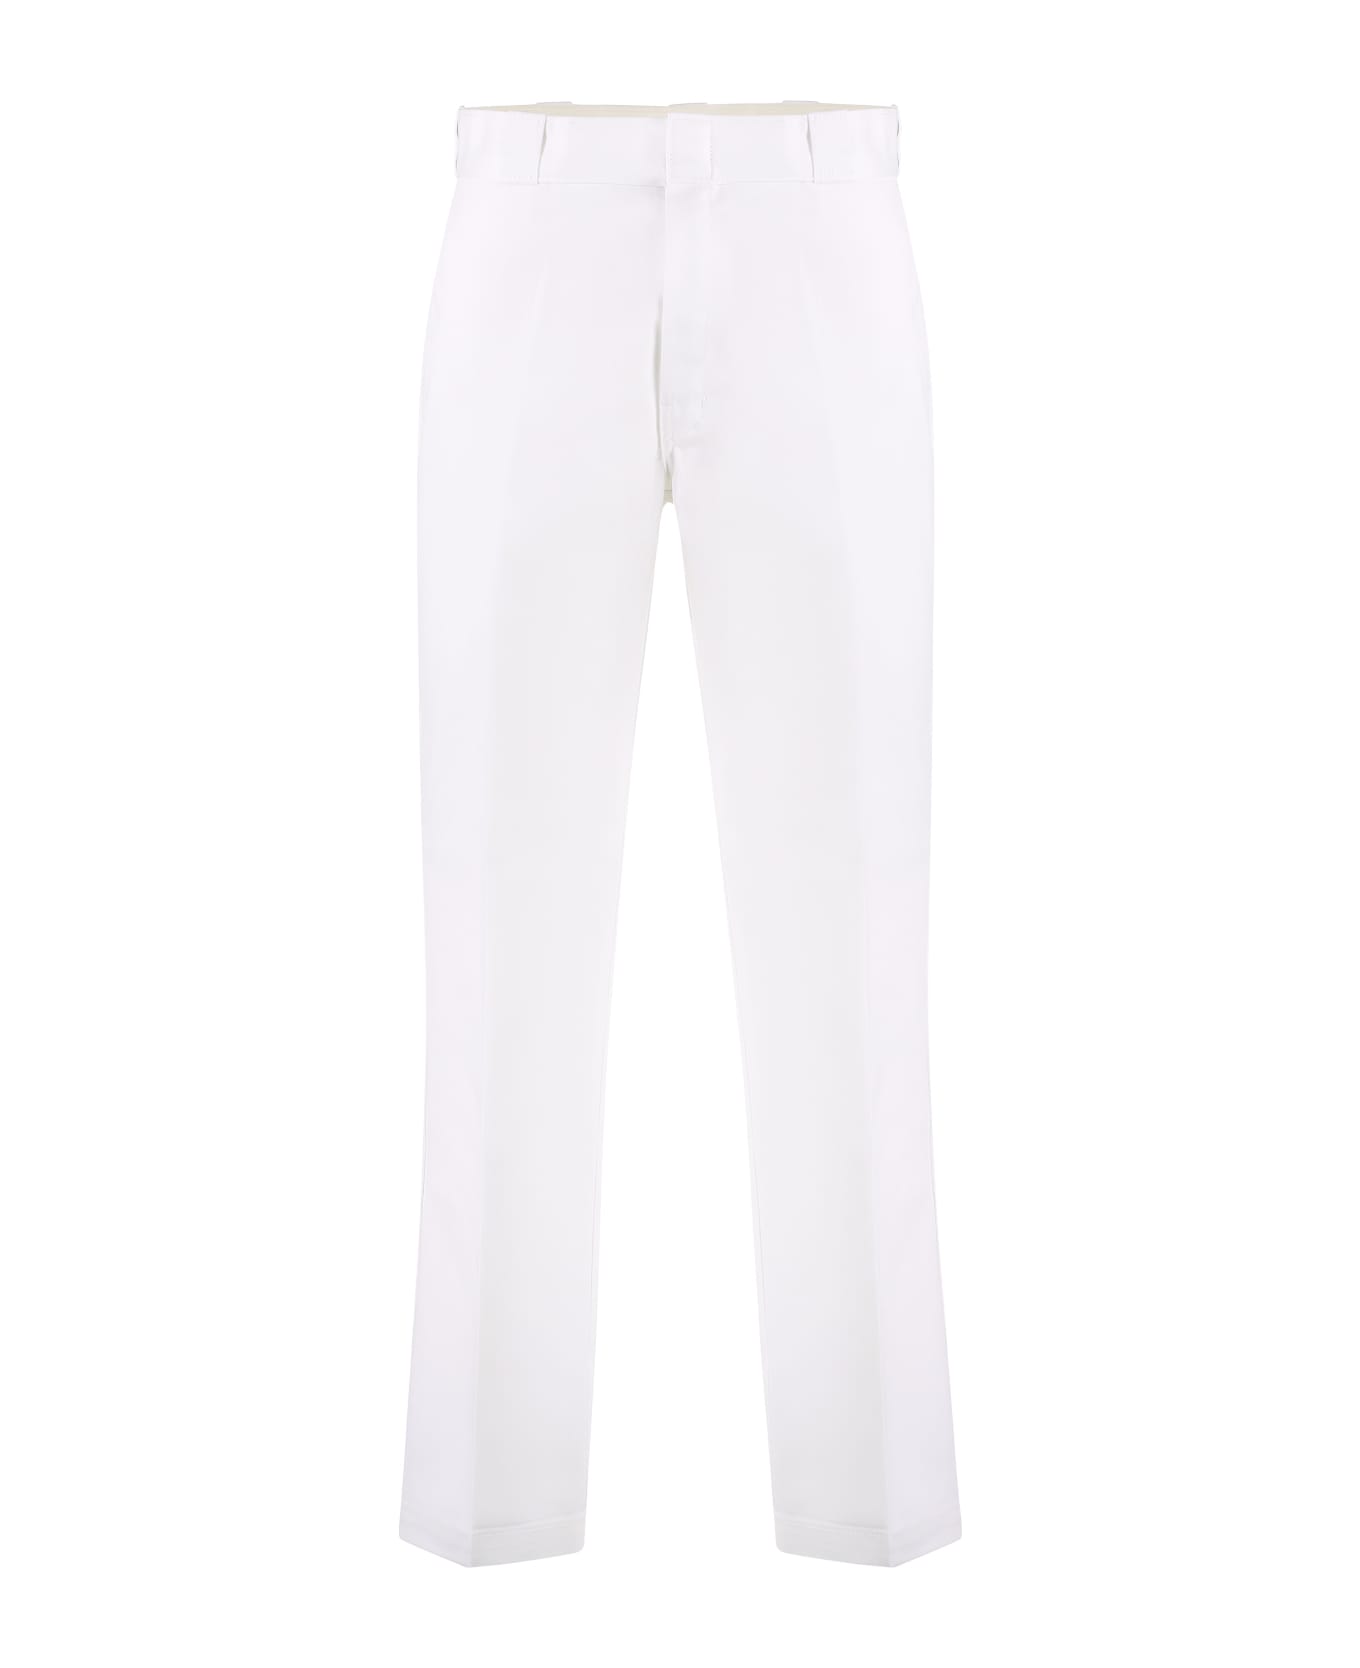 Dickies Cotton Blend Trousers - White